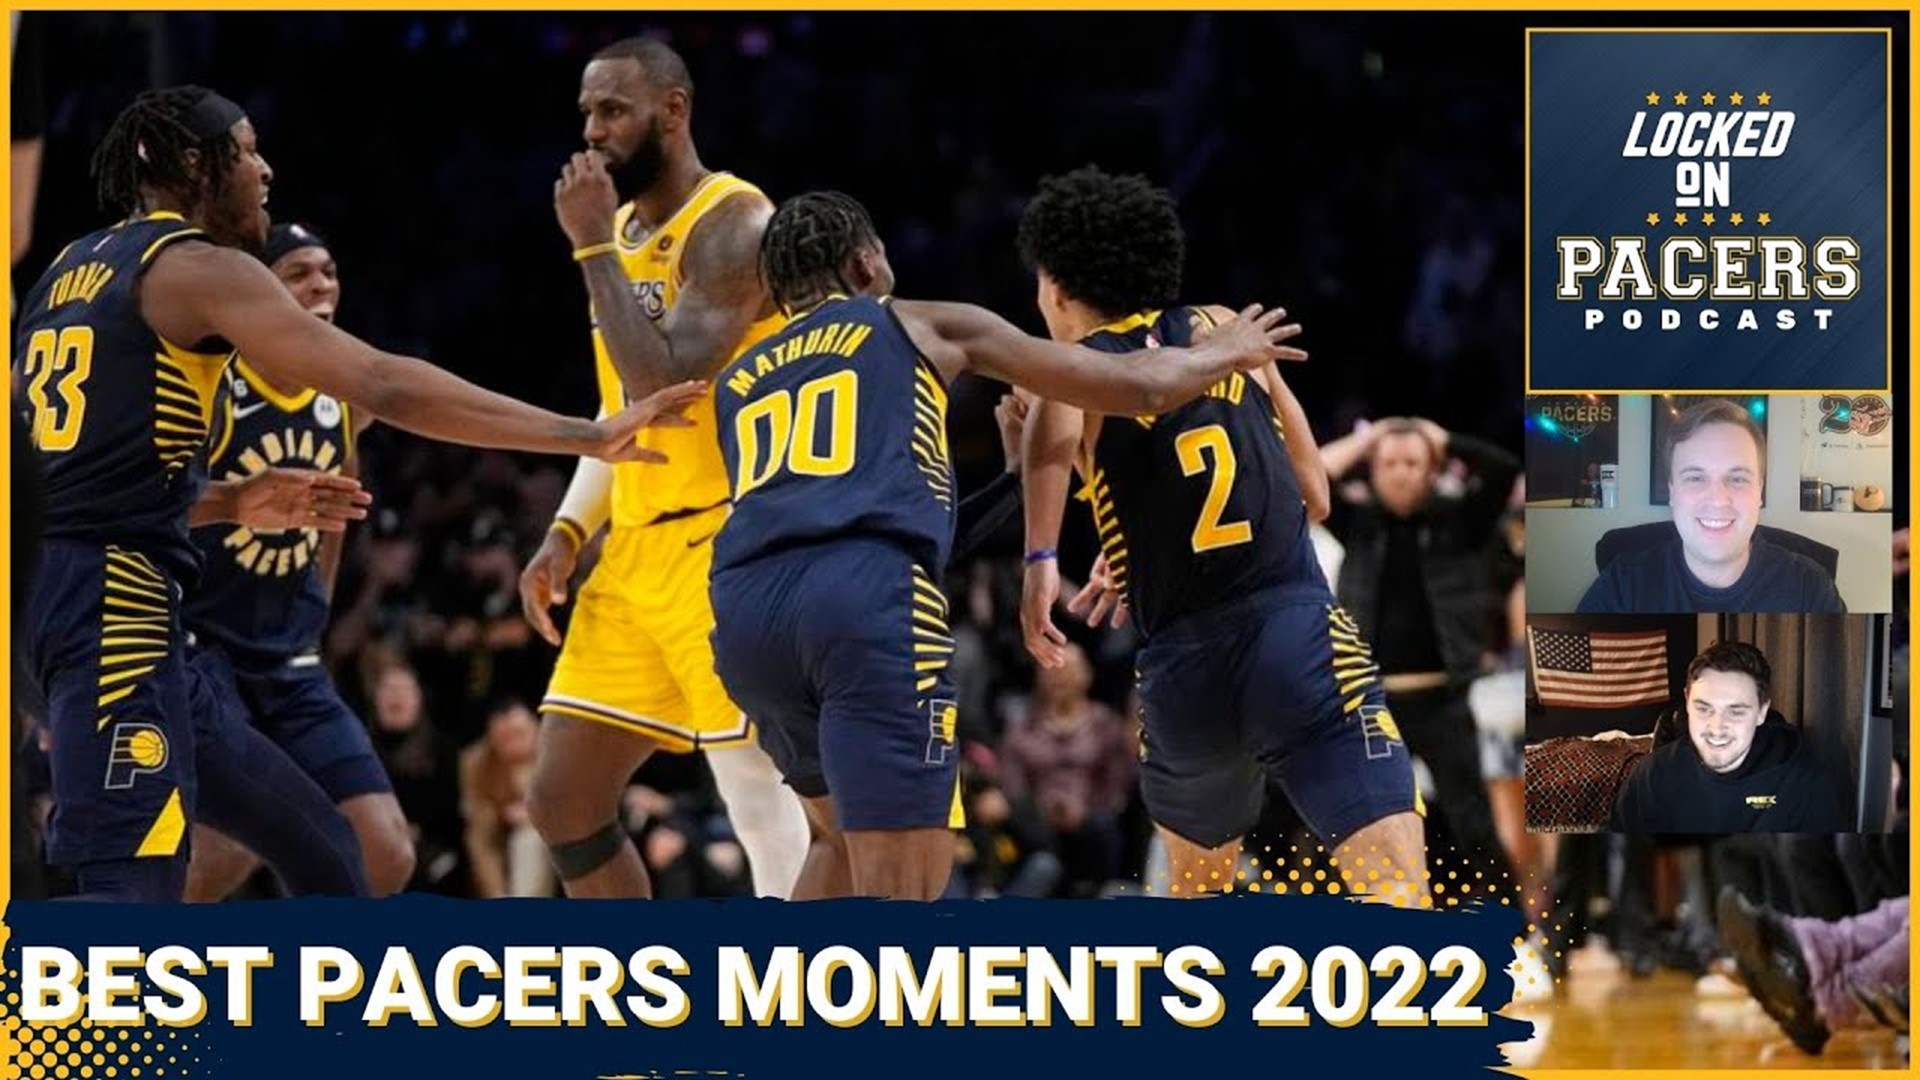 The Indiana Pacers best moments of 2022, including buzzer beaters and big scoring nights